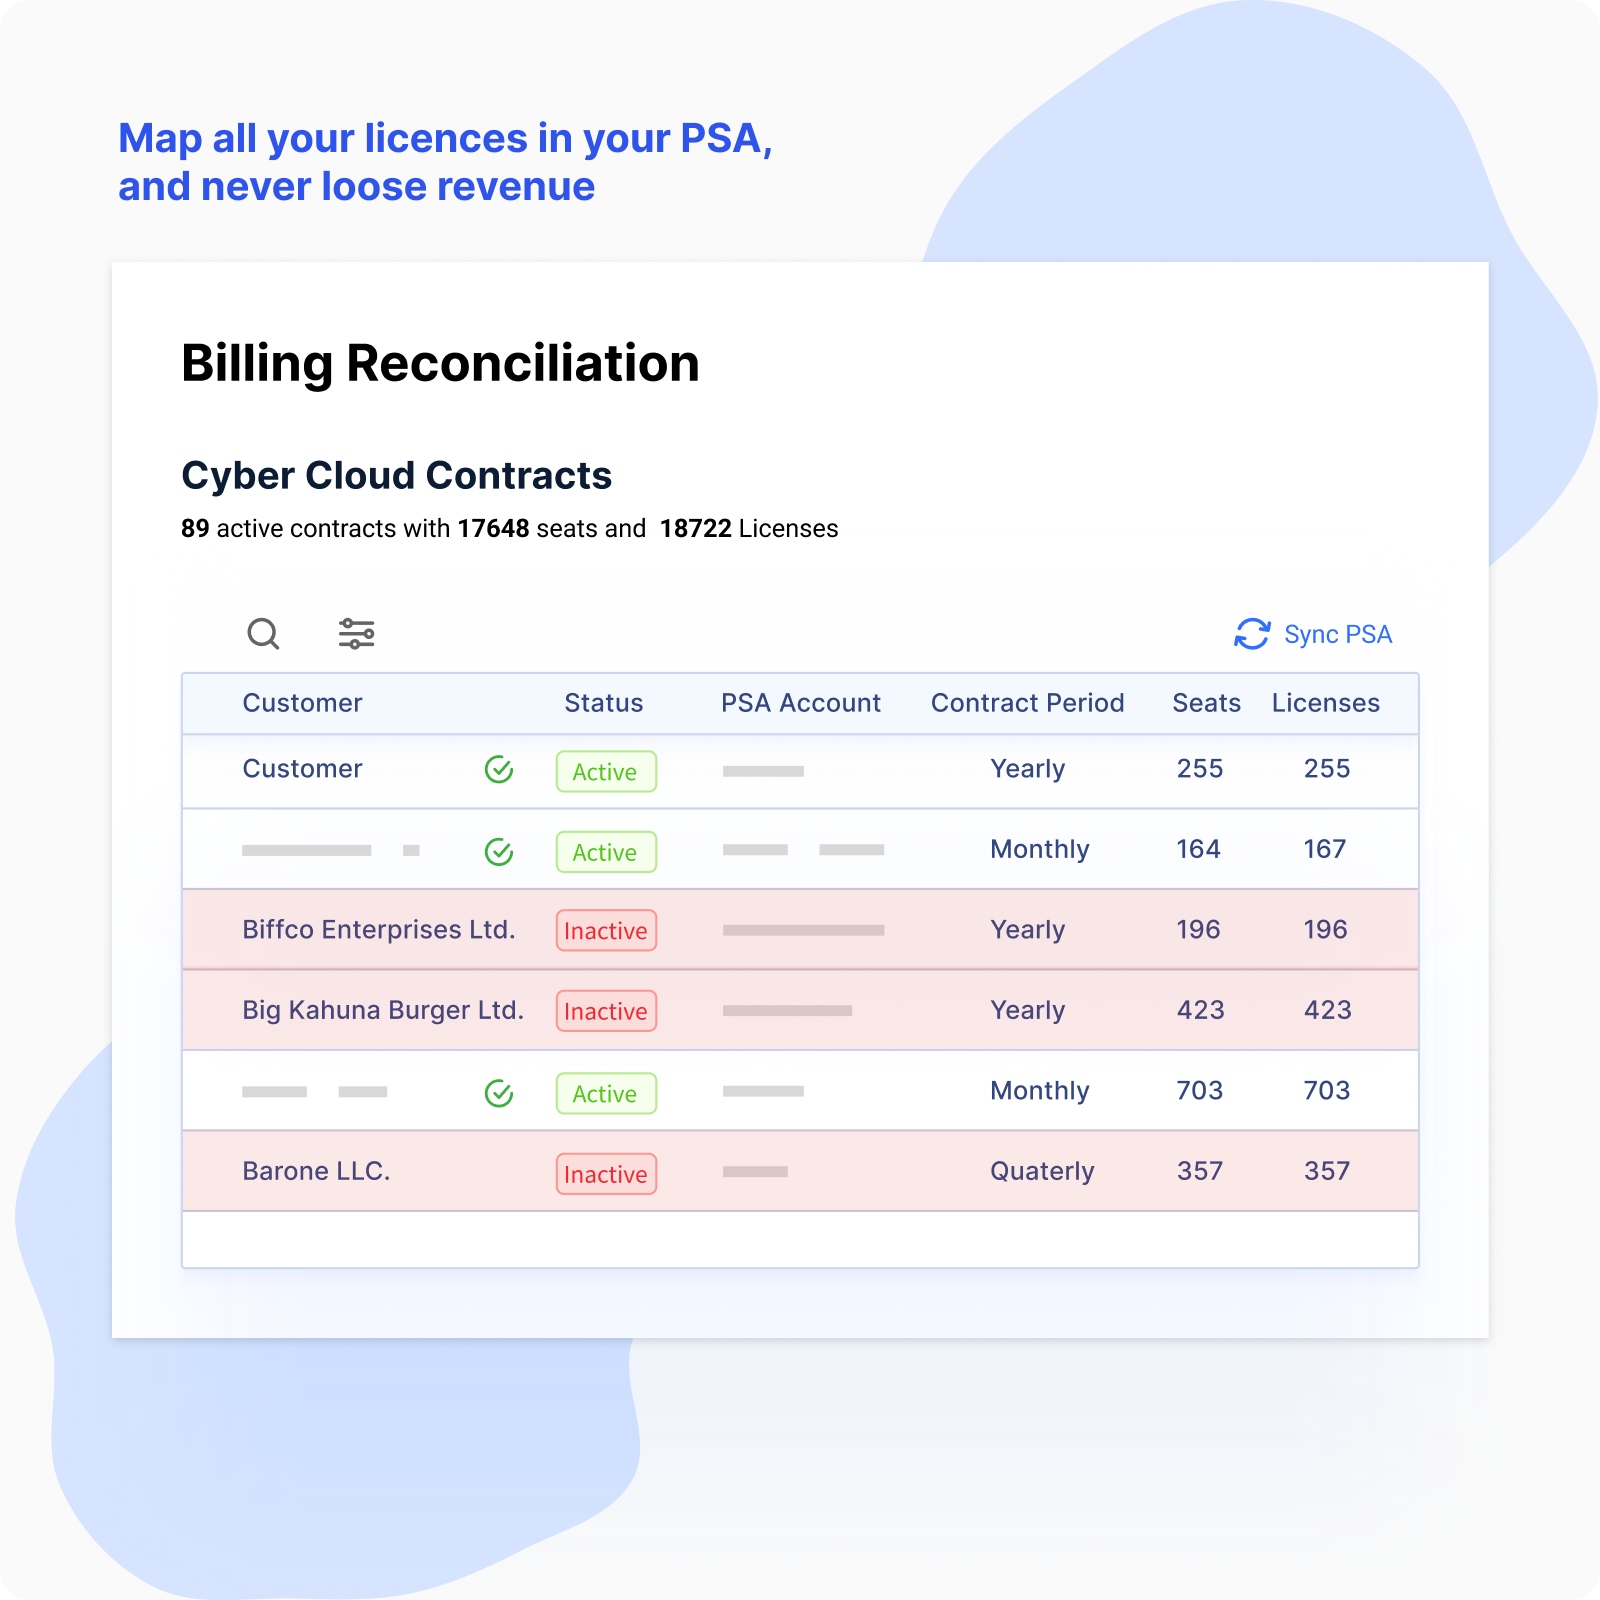 Map all your licenses in your PSA, and never loose revenue